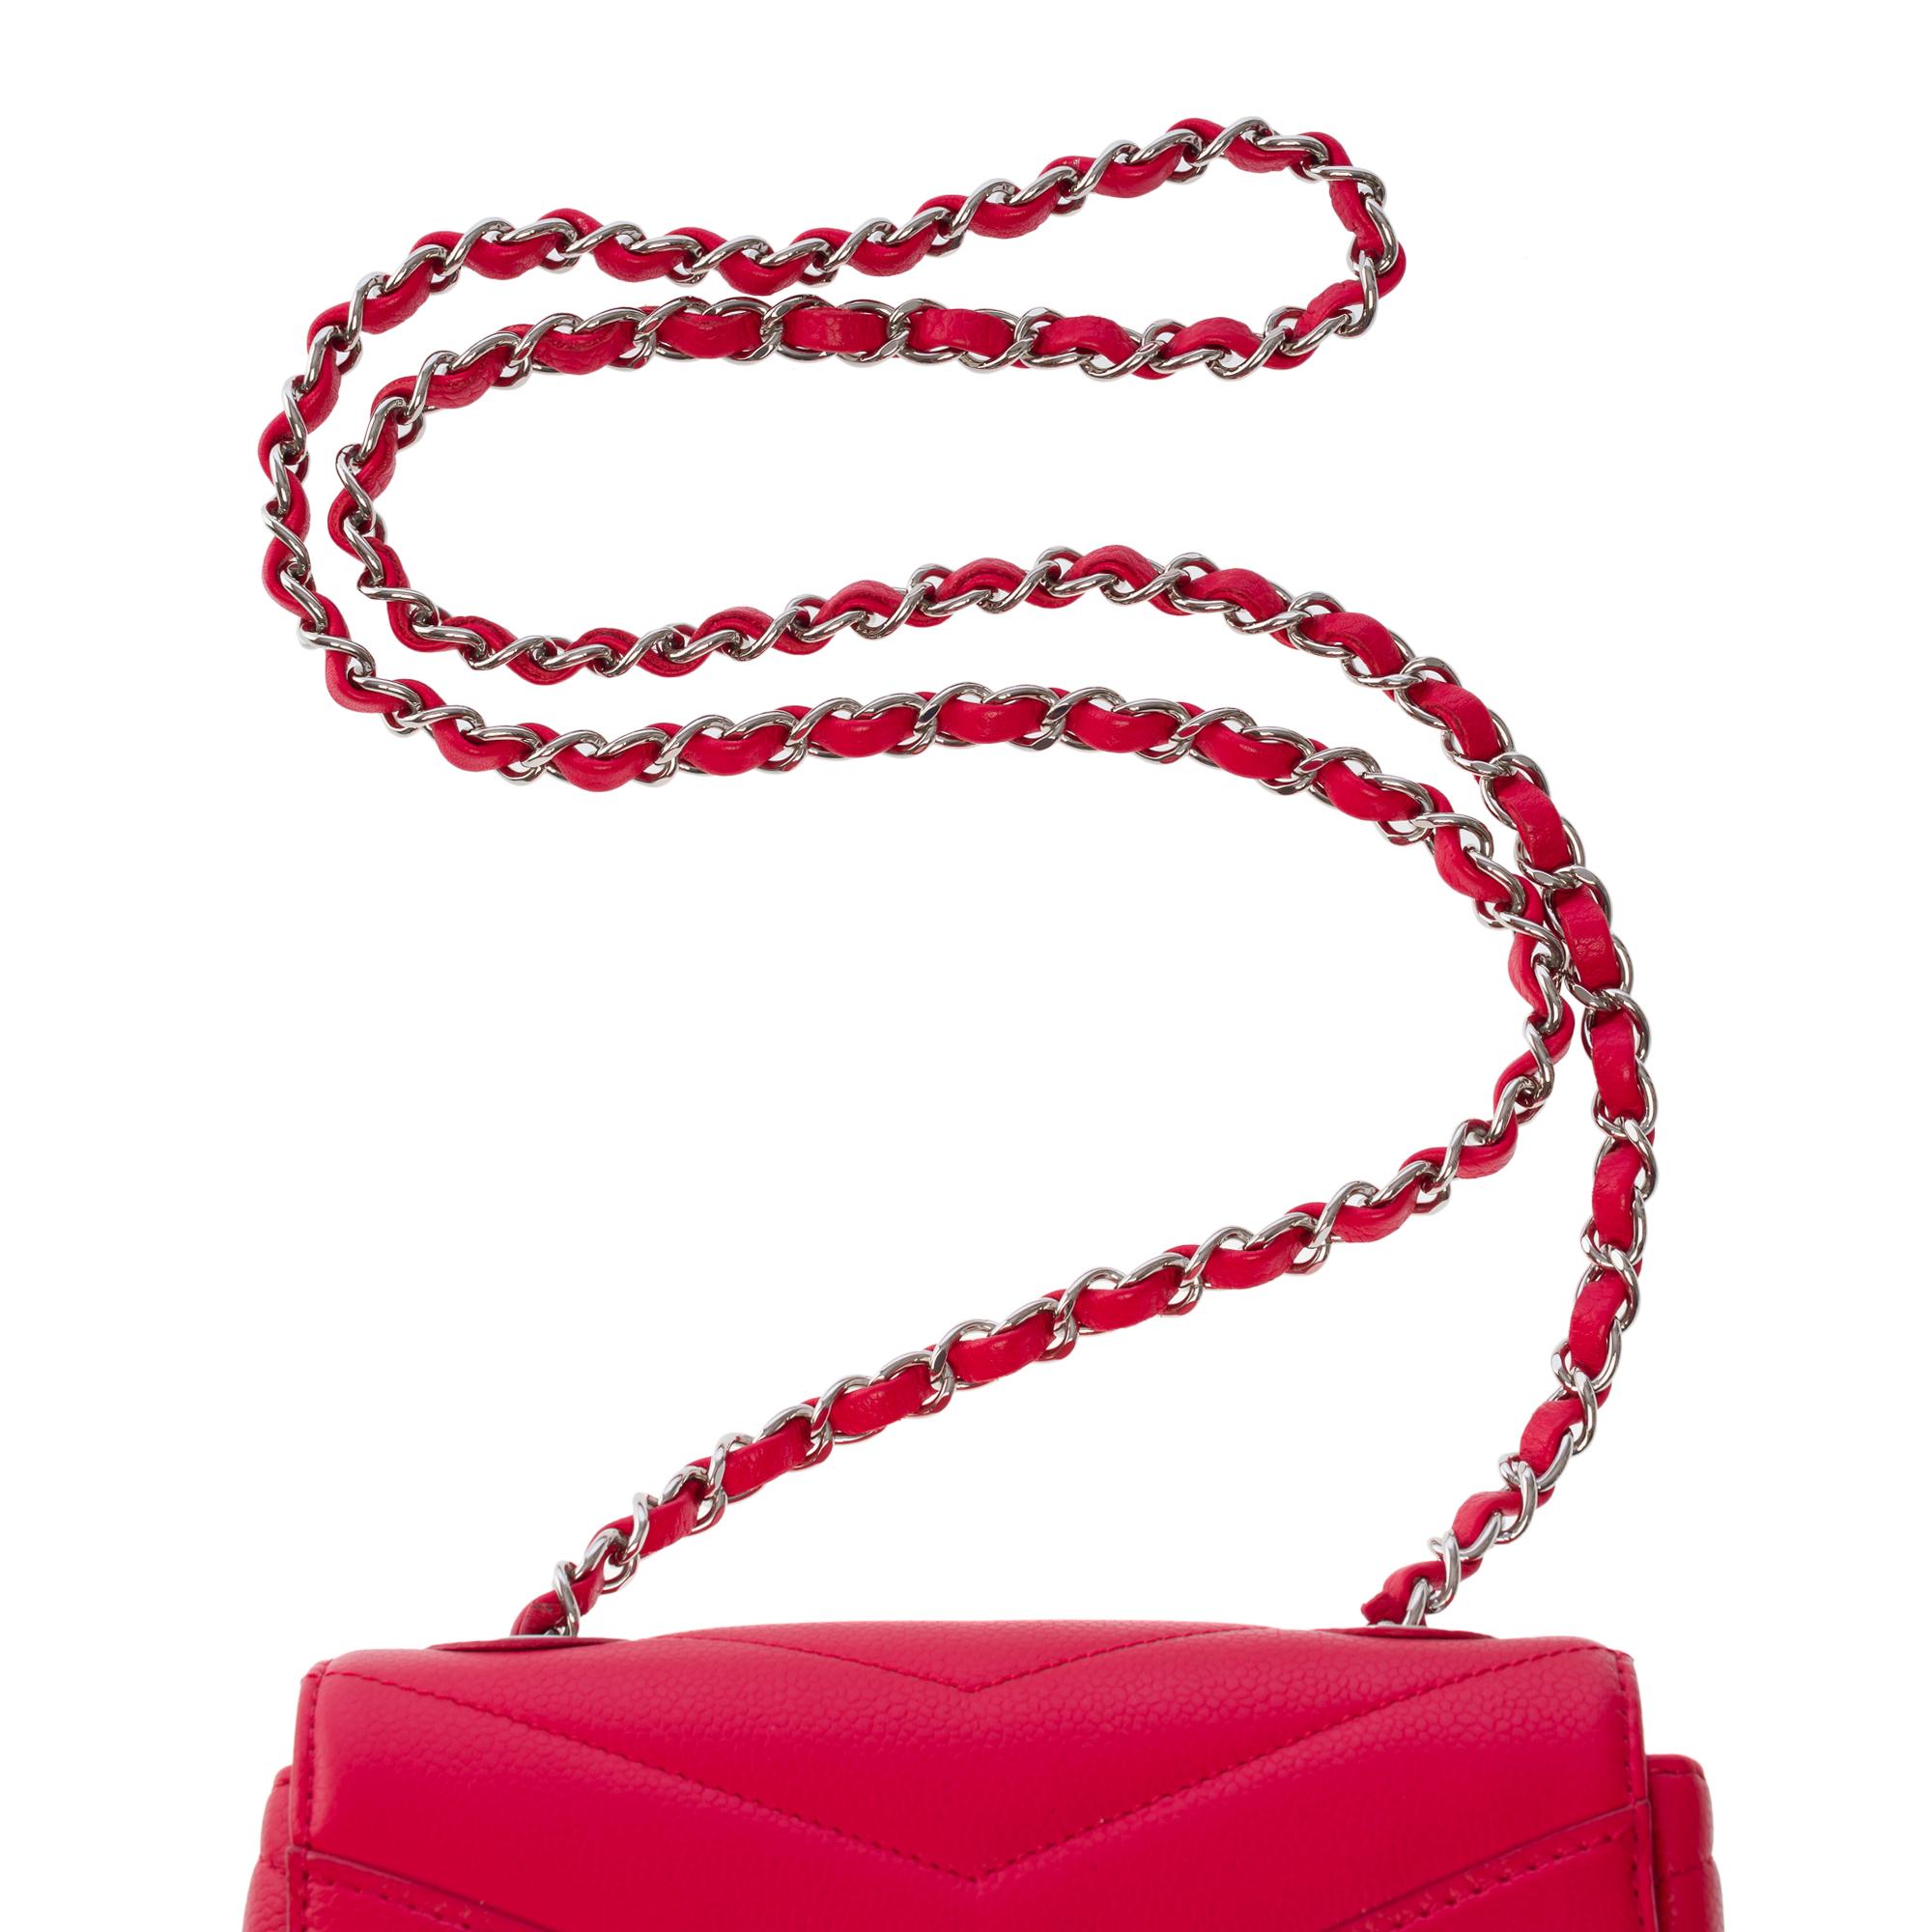 Chanel Mini Timeless shoulder bag in red herringbone quilted caviar leather, SHW For Sale 5